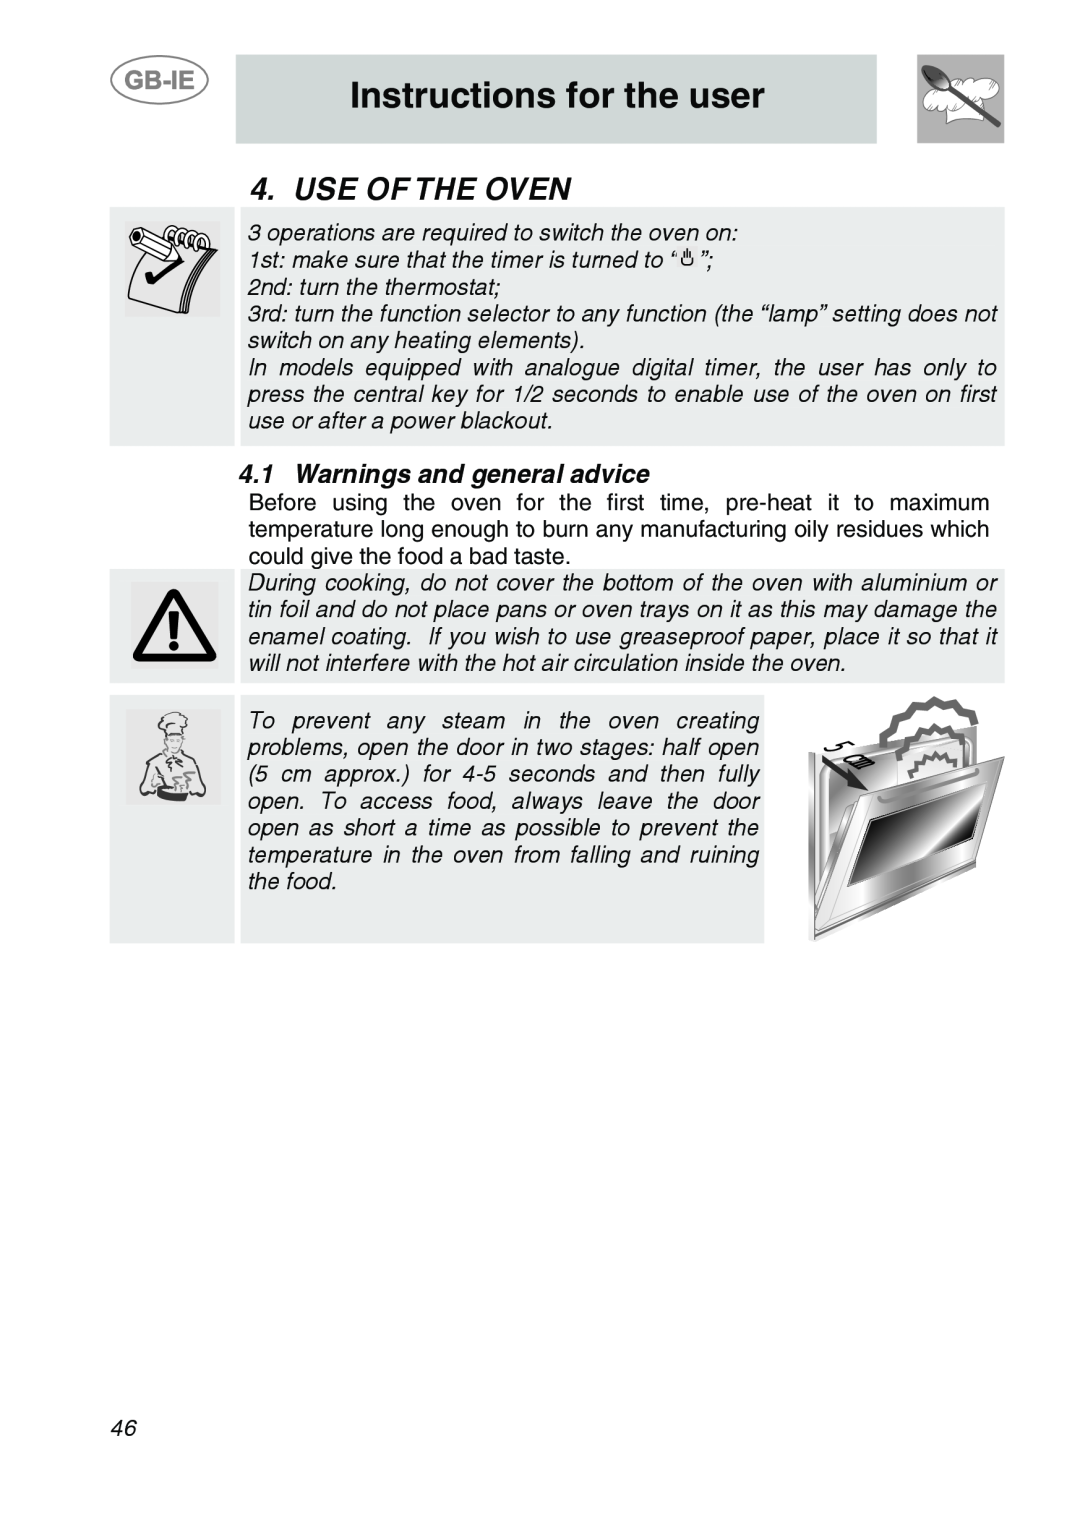 Smeg SC166PZ manual Use Of The Oven, Warnings and general advice, Instructions for the user 